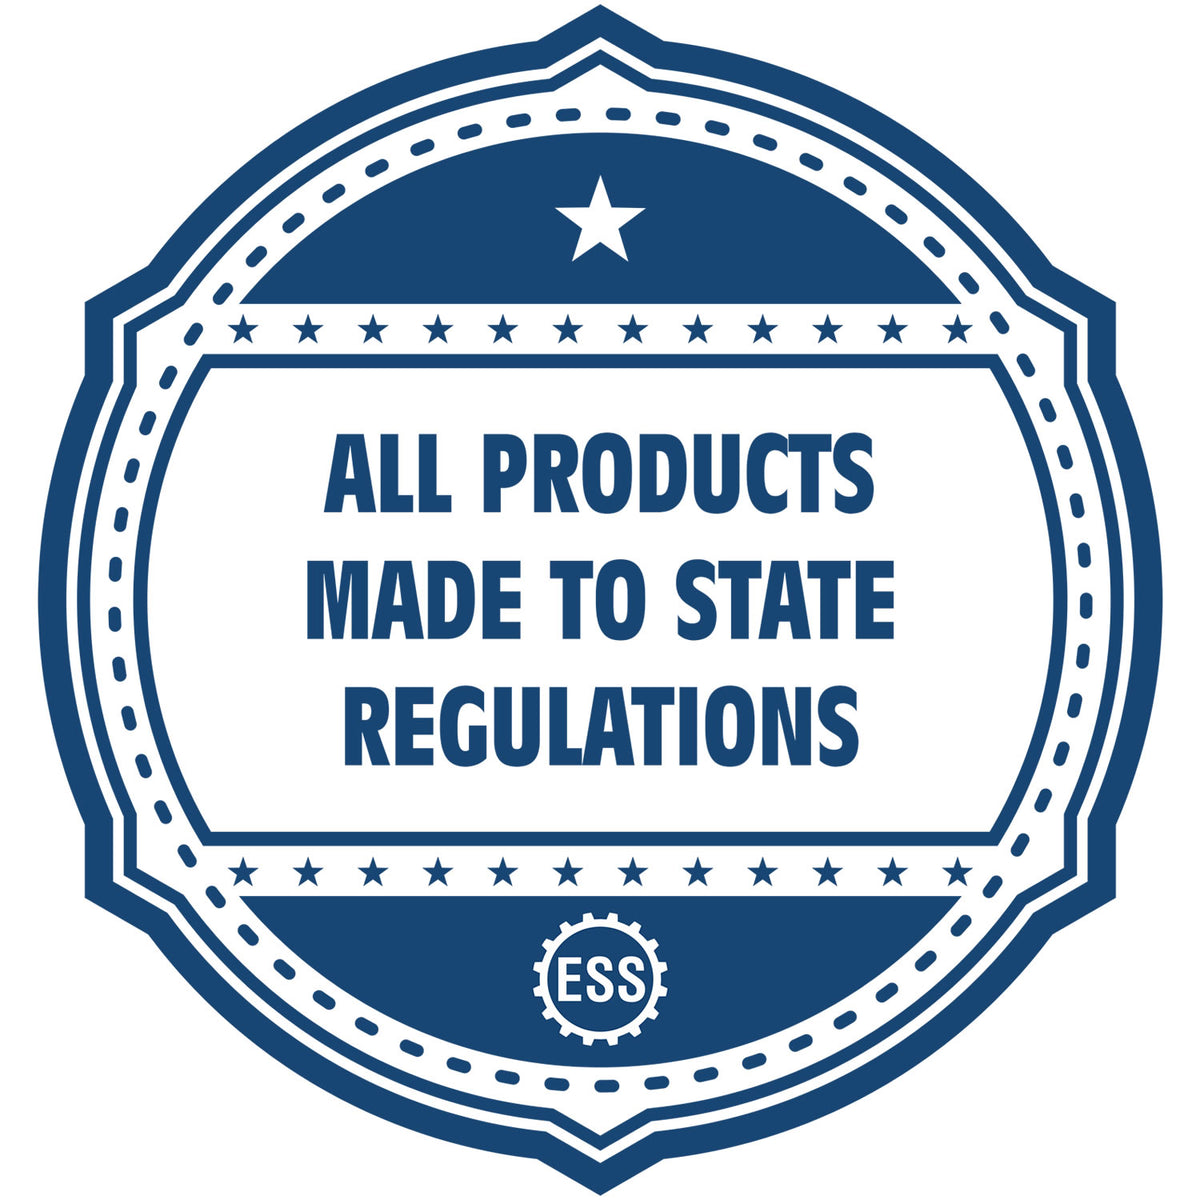 An icon or badge element for the Handheld Oklahoma Professional Engineer Embosser showing that this product is made in compliance with state regulations.